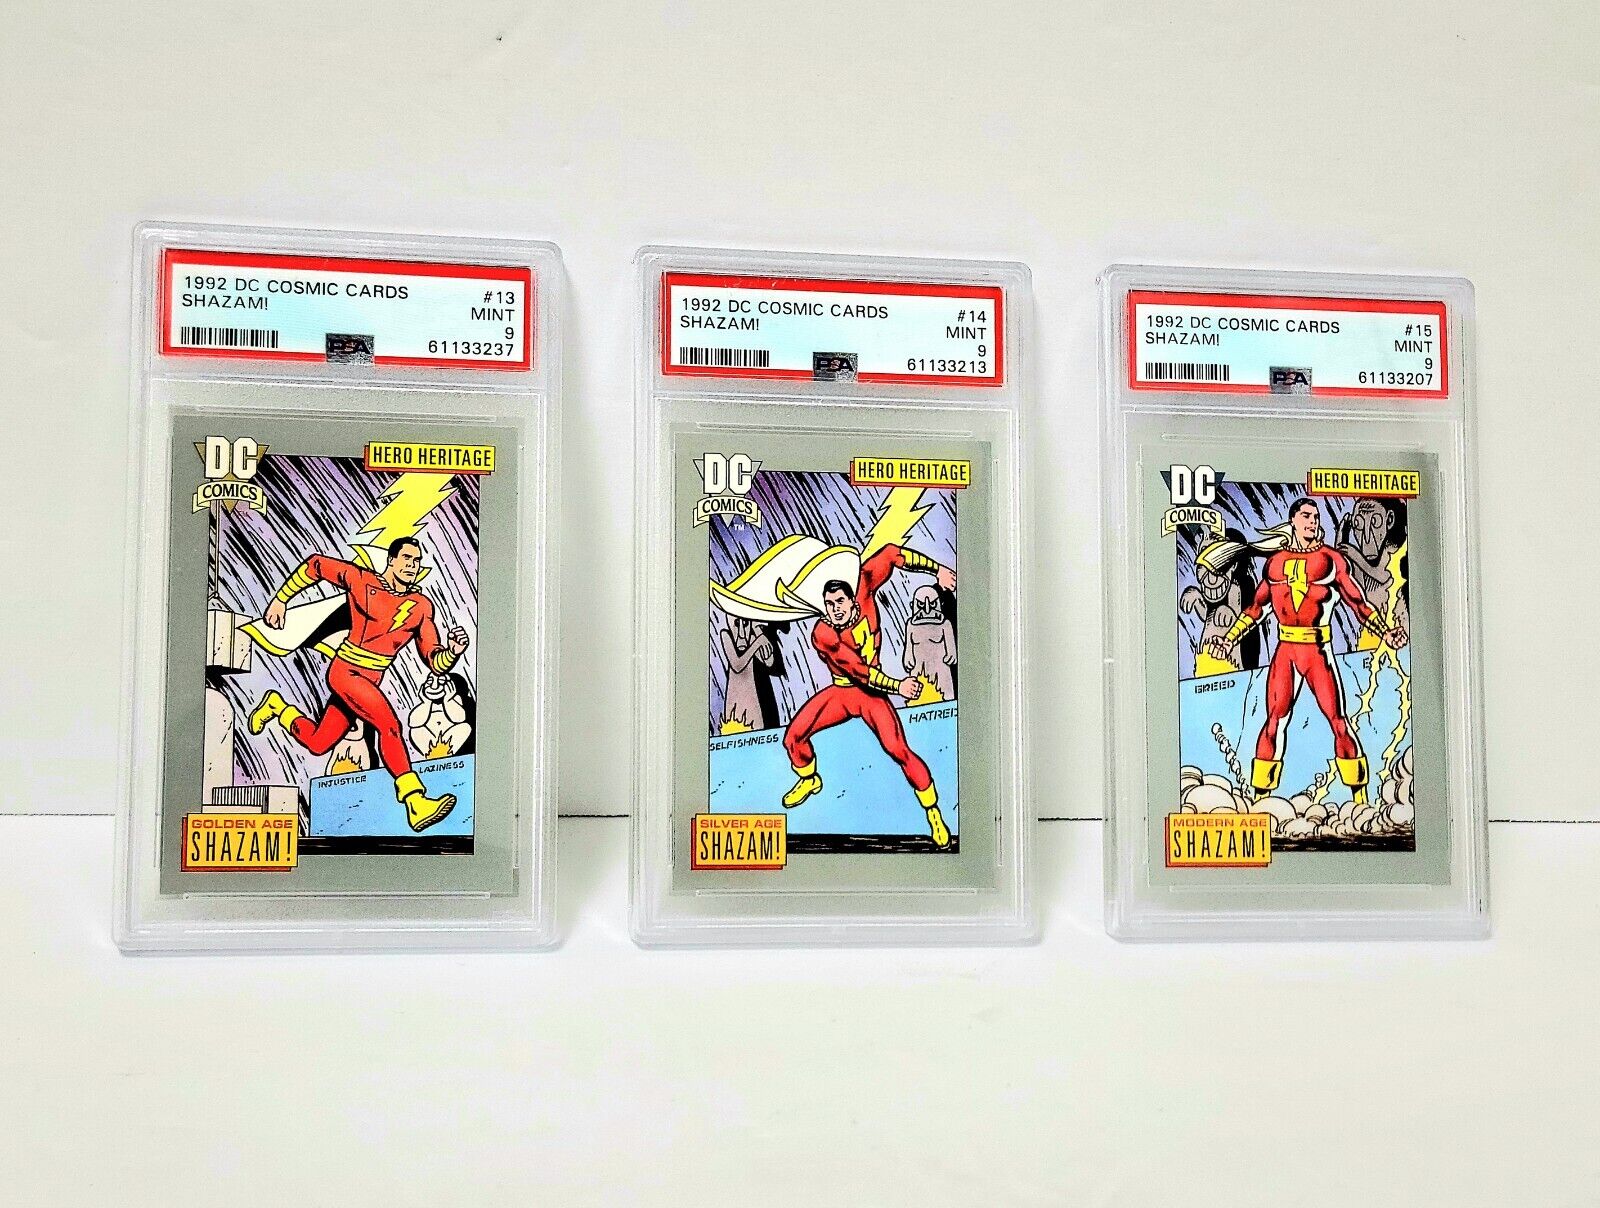 1992 Dc Cosmic Cards Shazam! Trading Card Collection Bundle Lot - All Psa 9 Mint